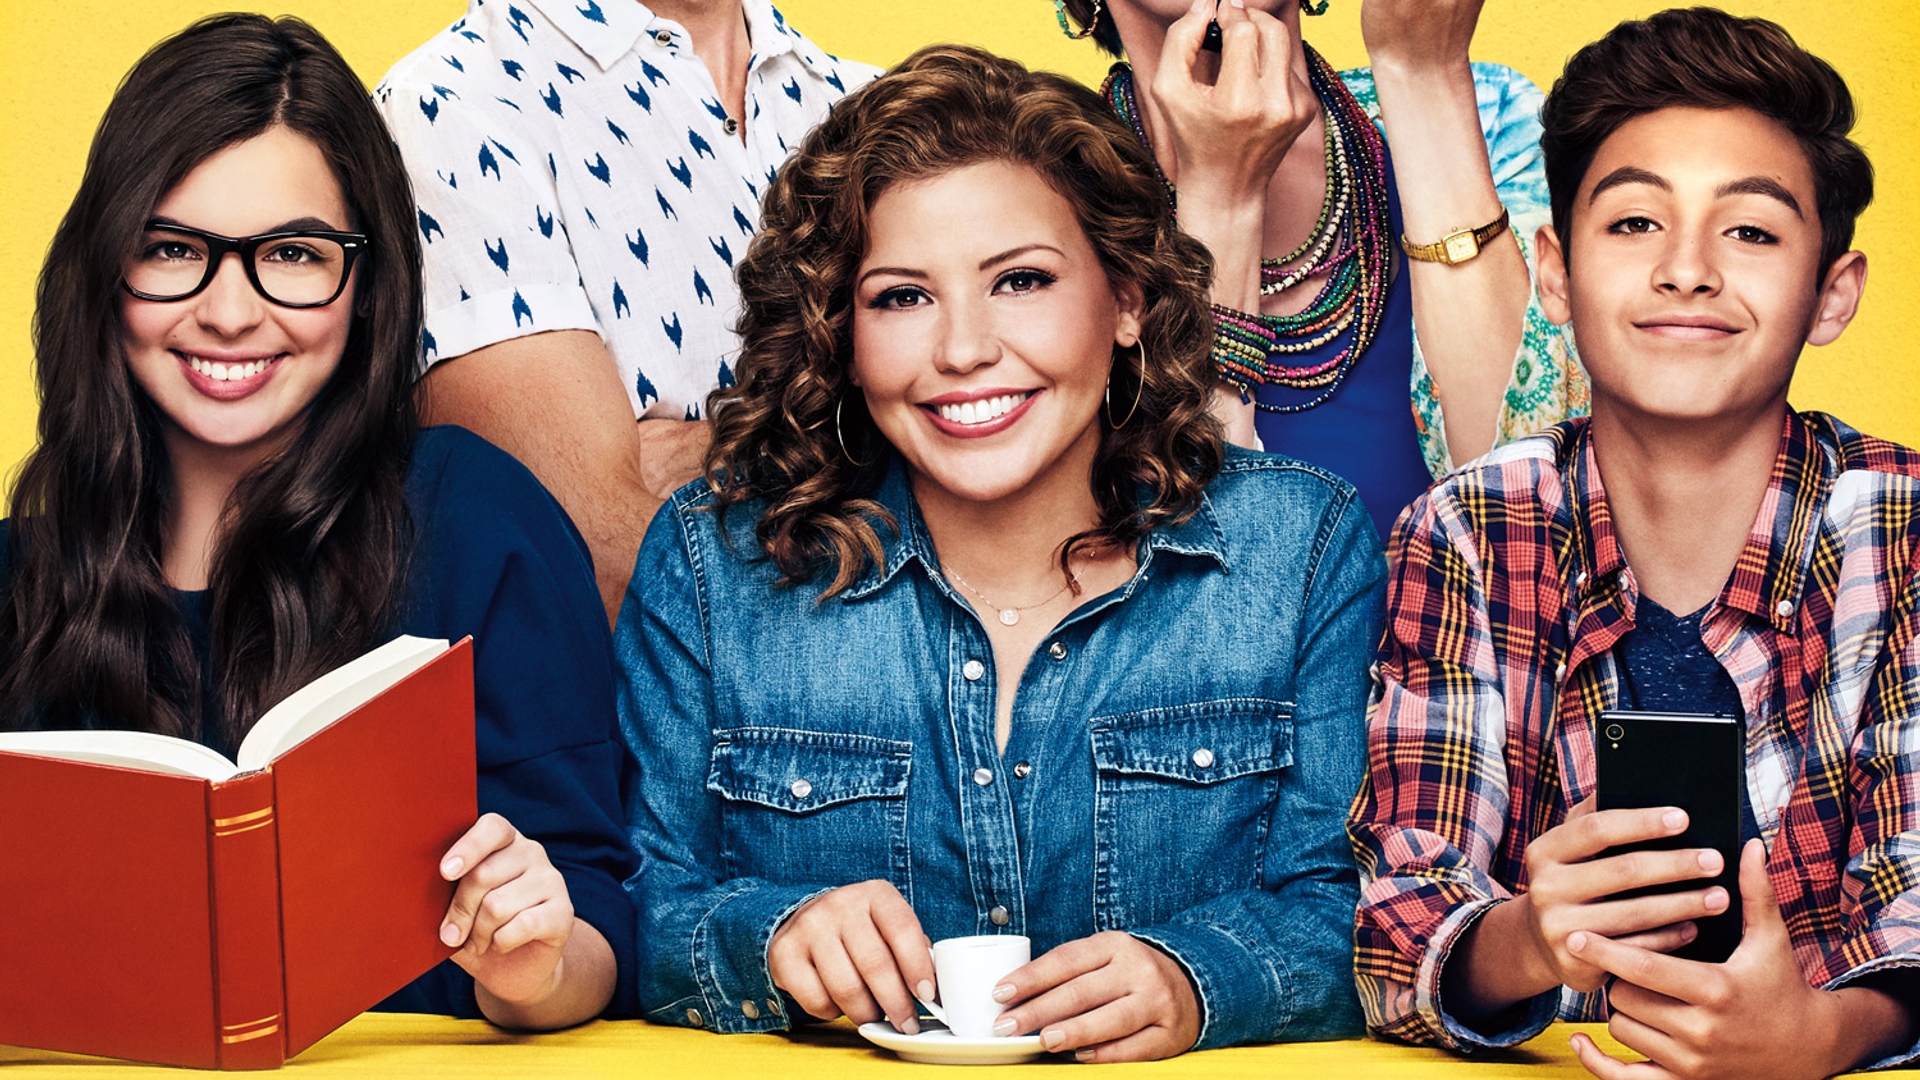 One Day At a Time S02 Poster